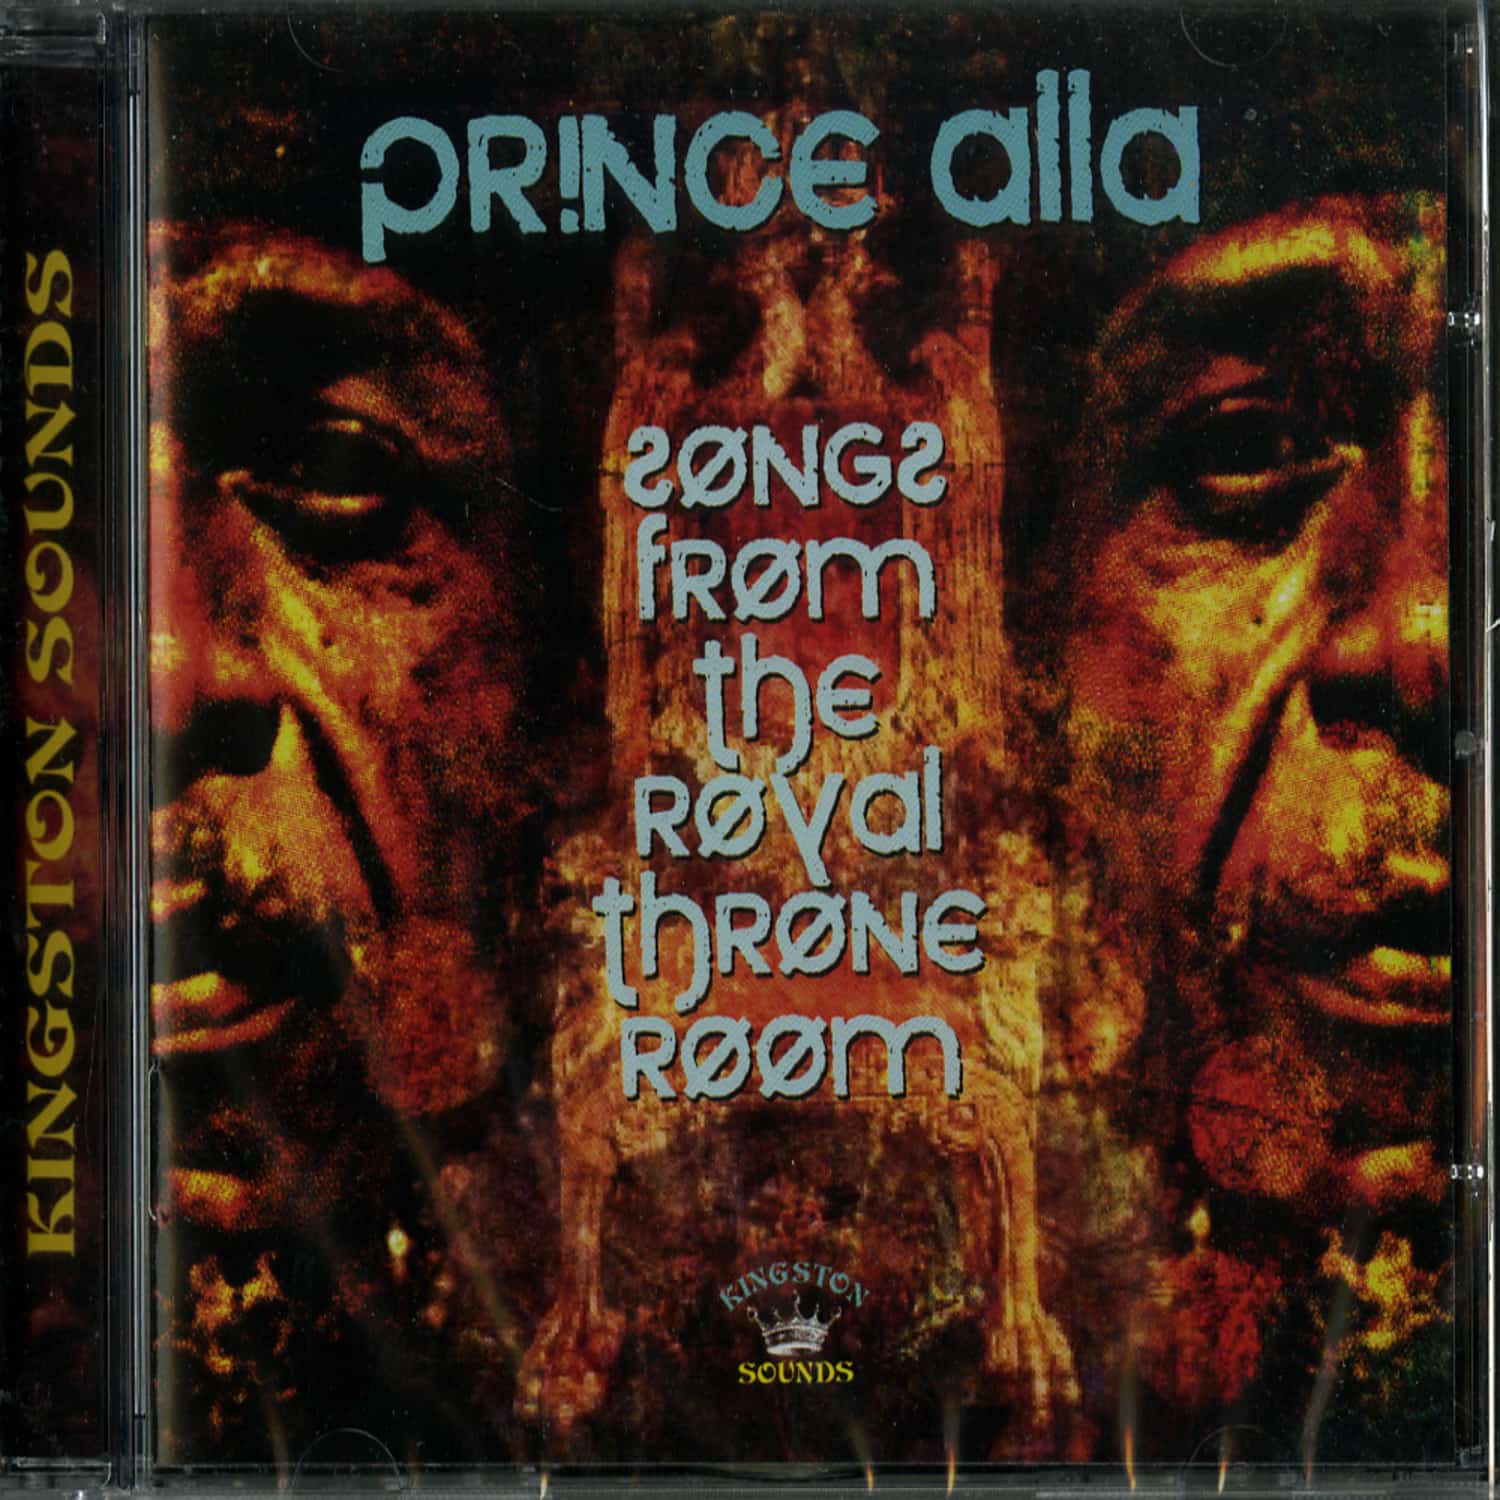 Prince Alla - SONGS FROM THE ROYAL THRONE ROOM 